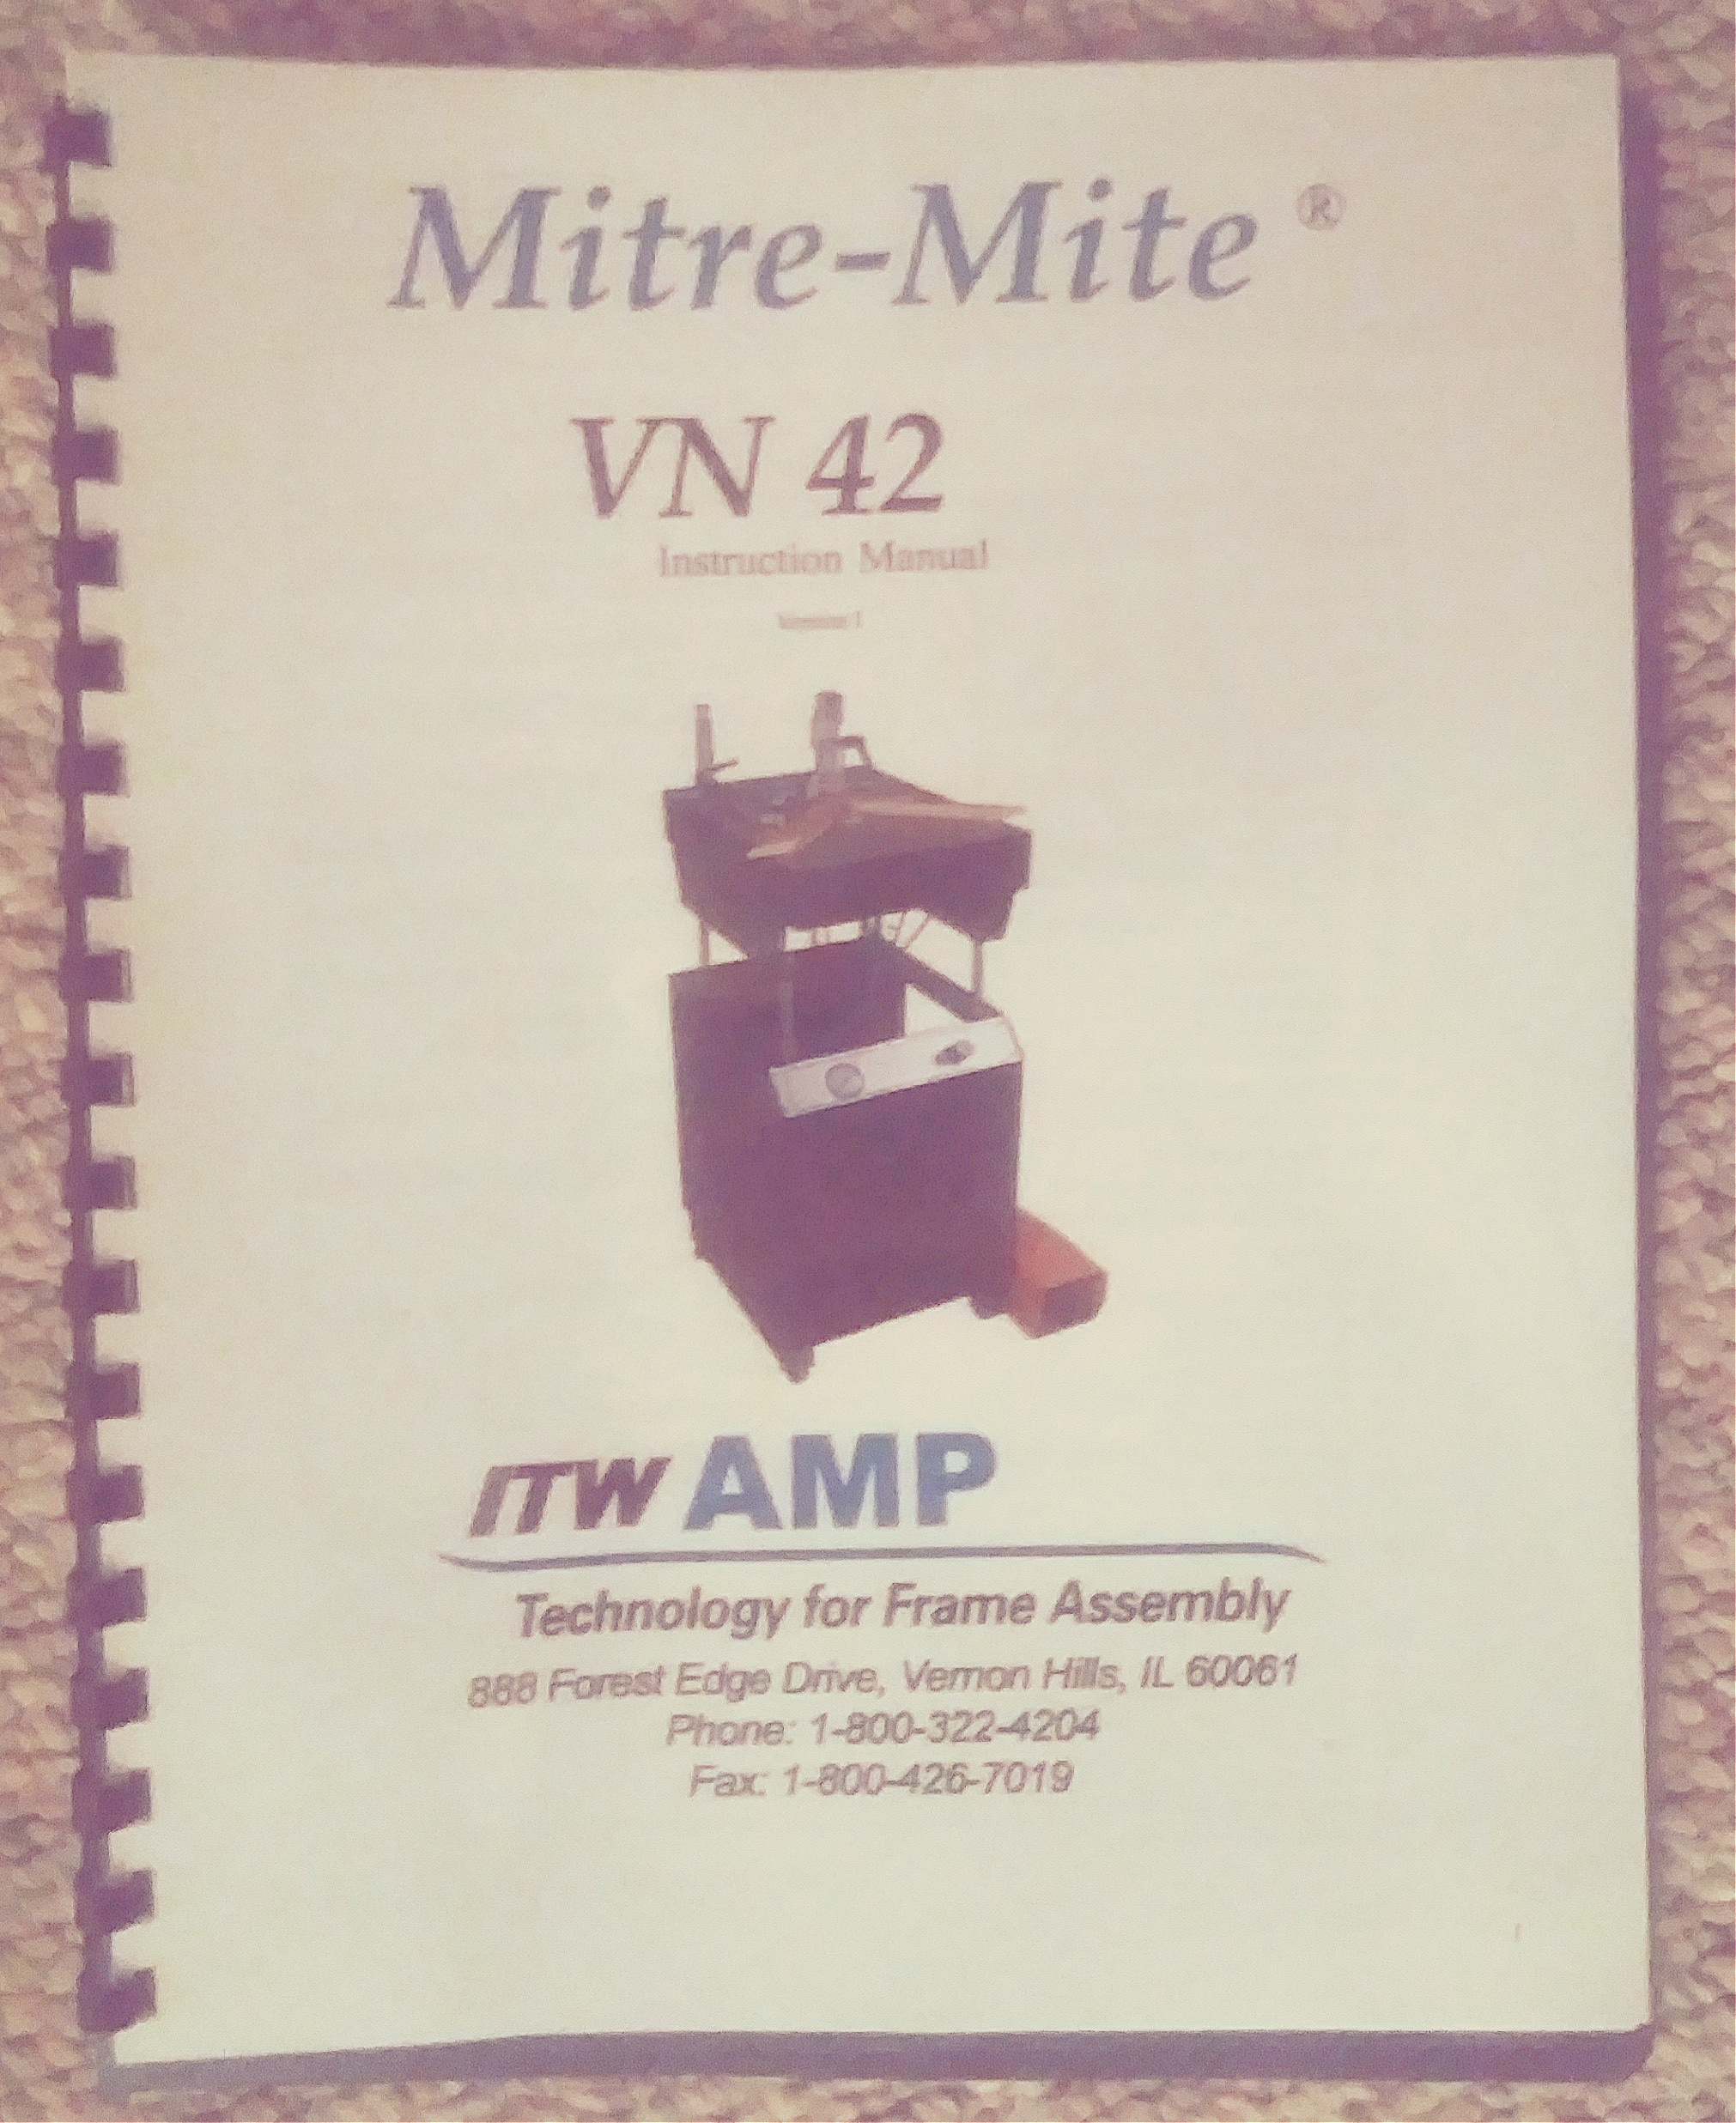 Picture Framing Equipment Lot: Mitre Mite VN42 Vnailer, Wizard 5000 Cutter & Print Bin (Used) Item # UE-072821A (MN)